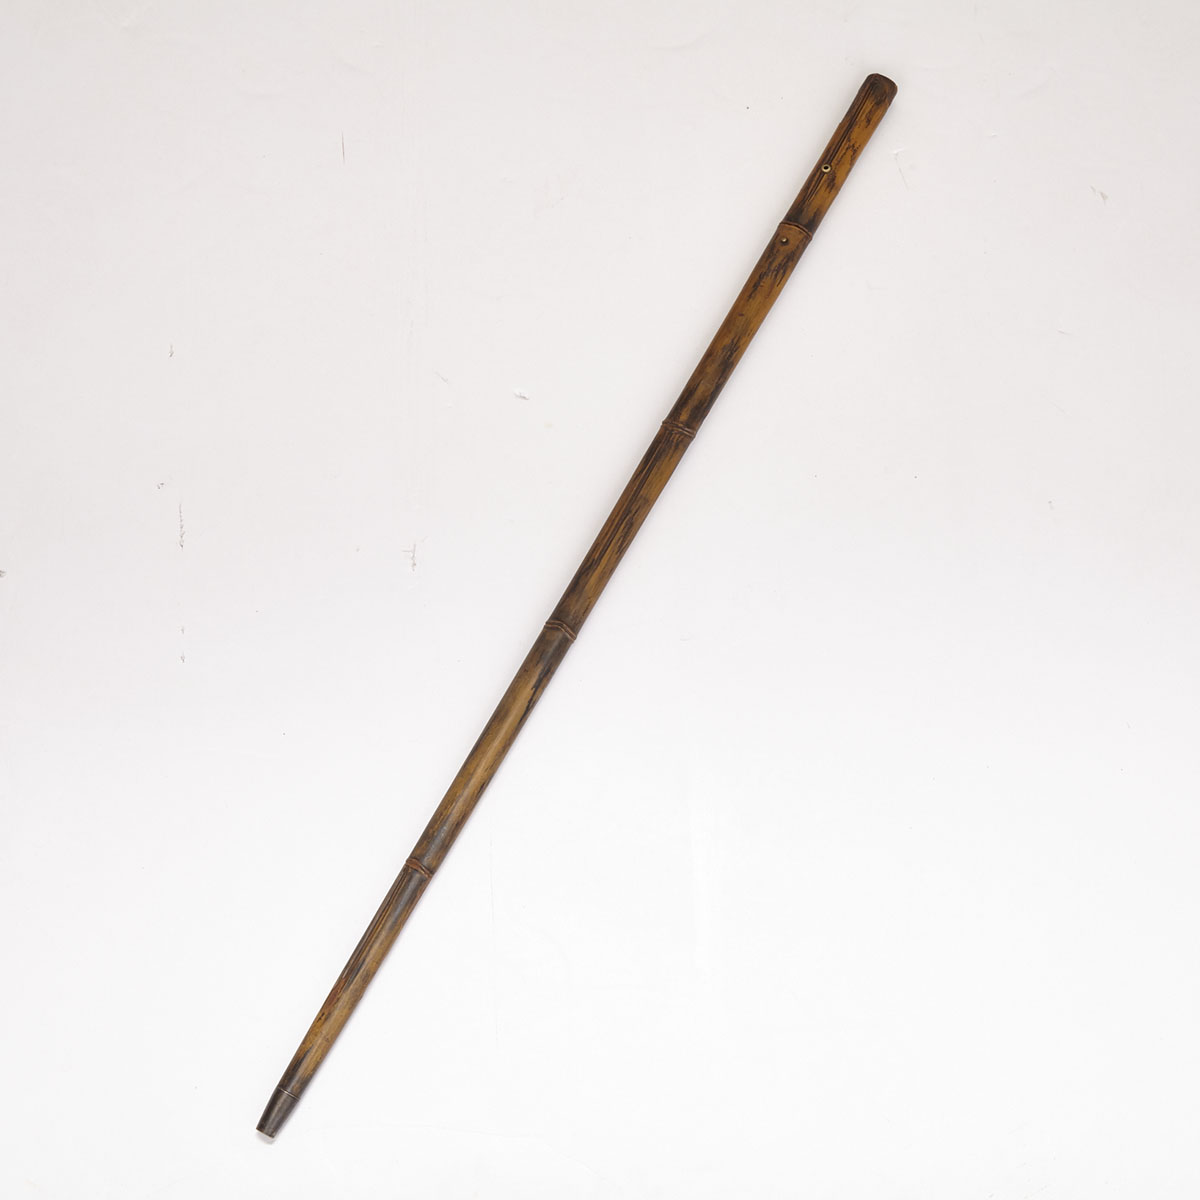 Japanese Faux Bamboo Sword Gadget Cane, early 20th century